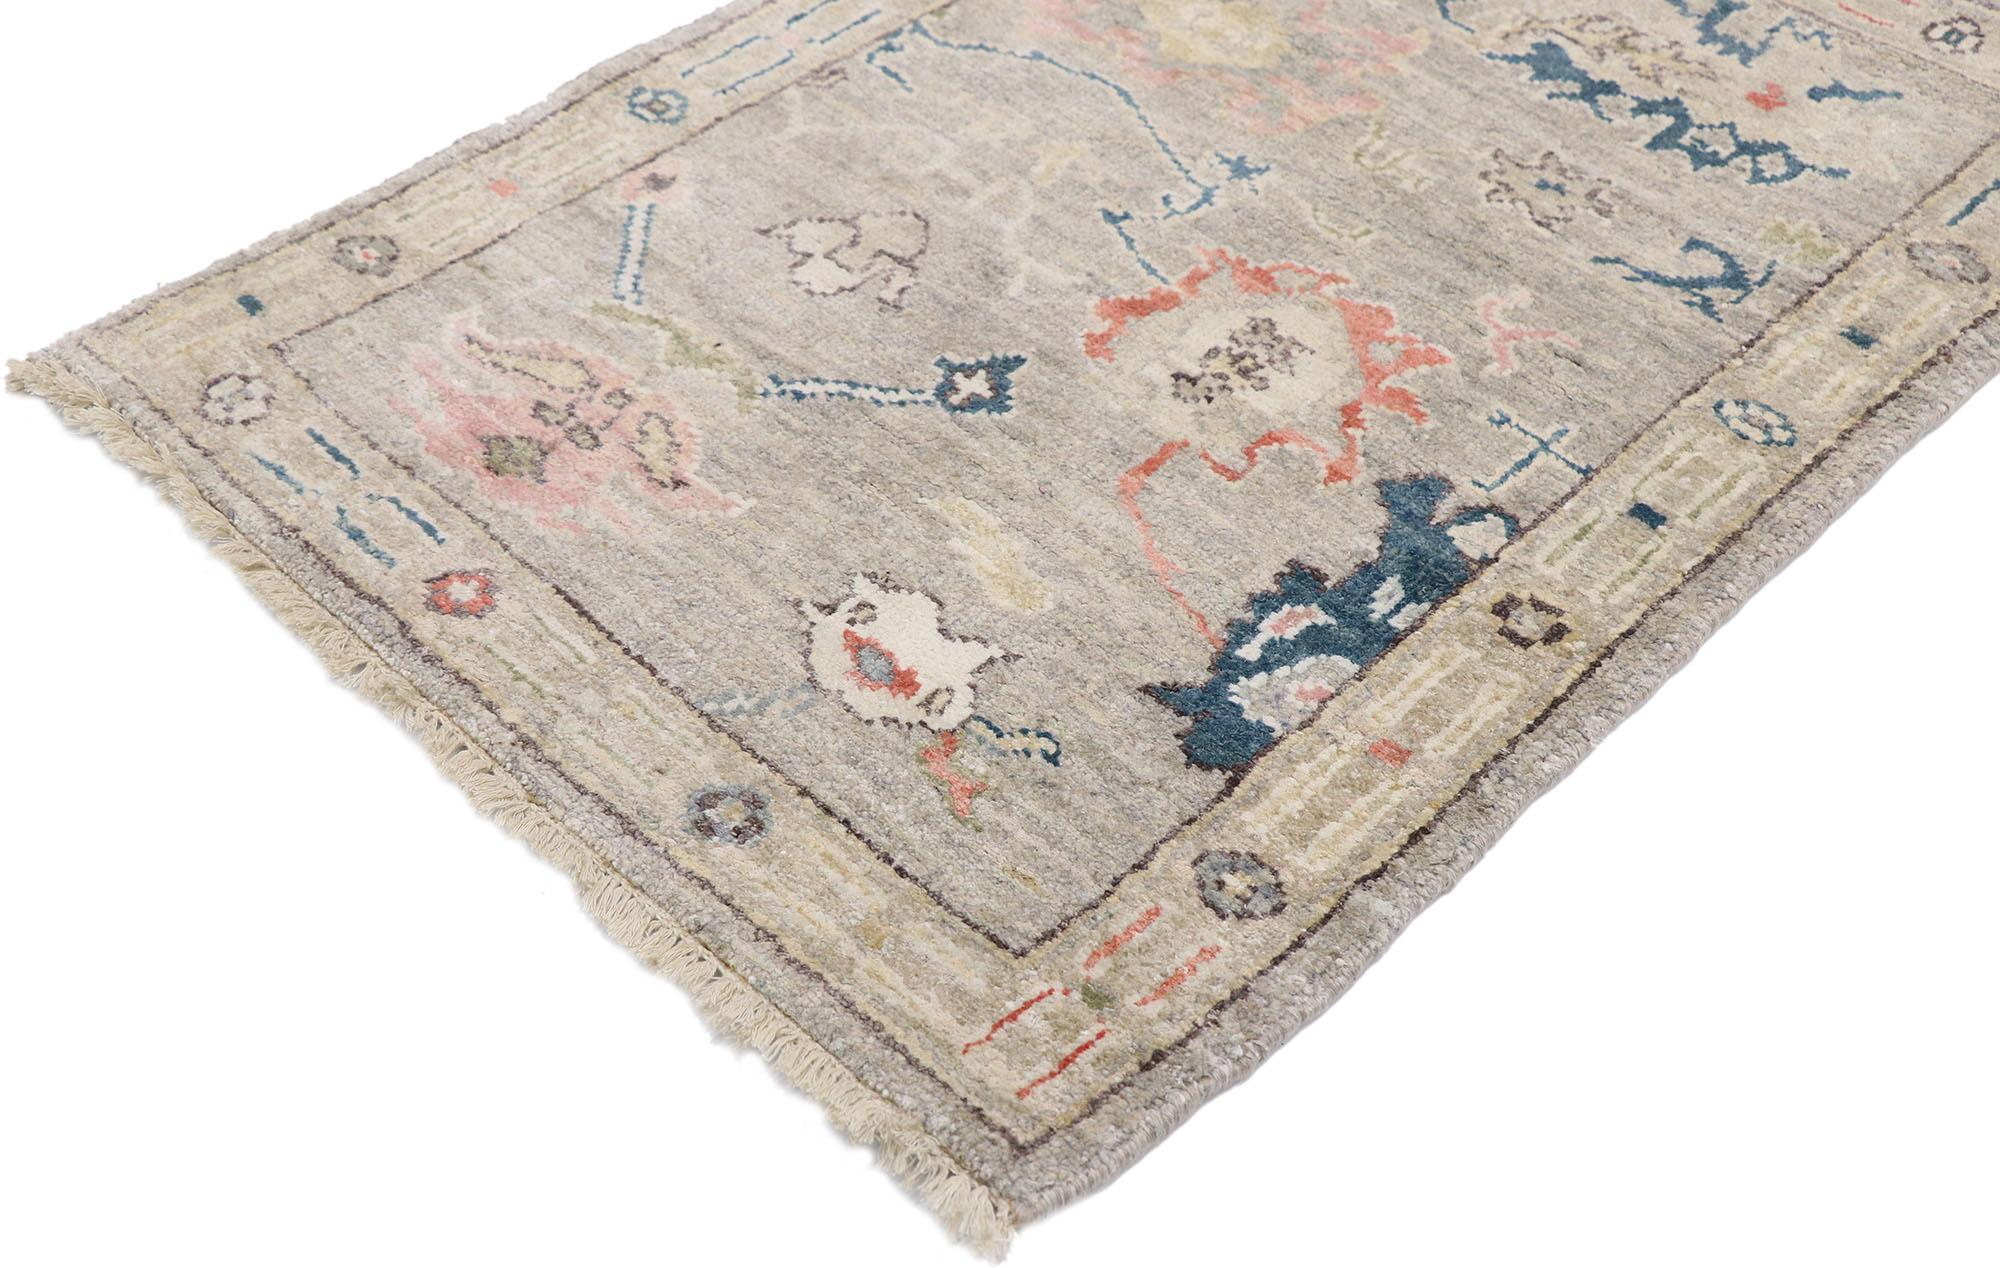 30647 New Contemporary Indian Oushak Rug with Modern Transitional Style 02'02 x 03'02. Displaying a timeless design and soft colors, serve up sophistication and modern elegance with this hand-knotted silk contemporary Oushak style rug. An array of